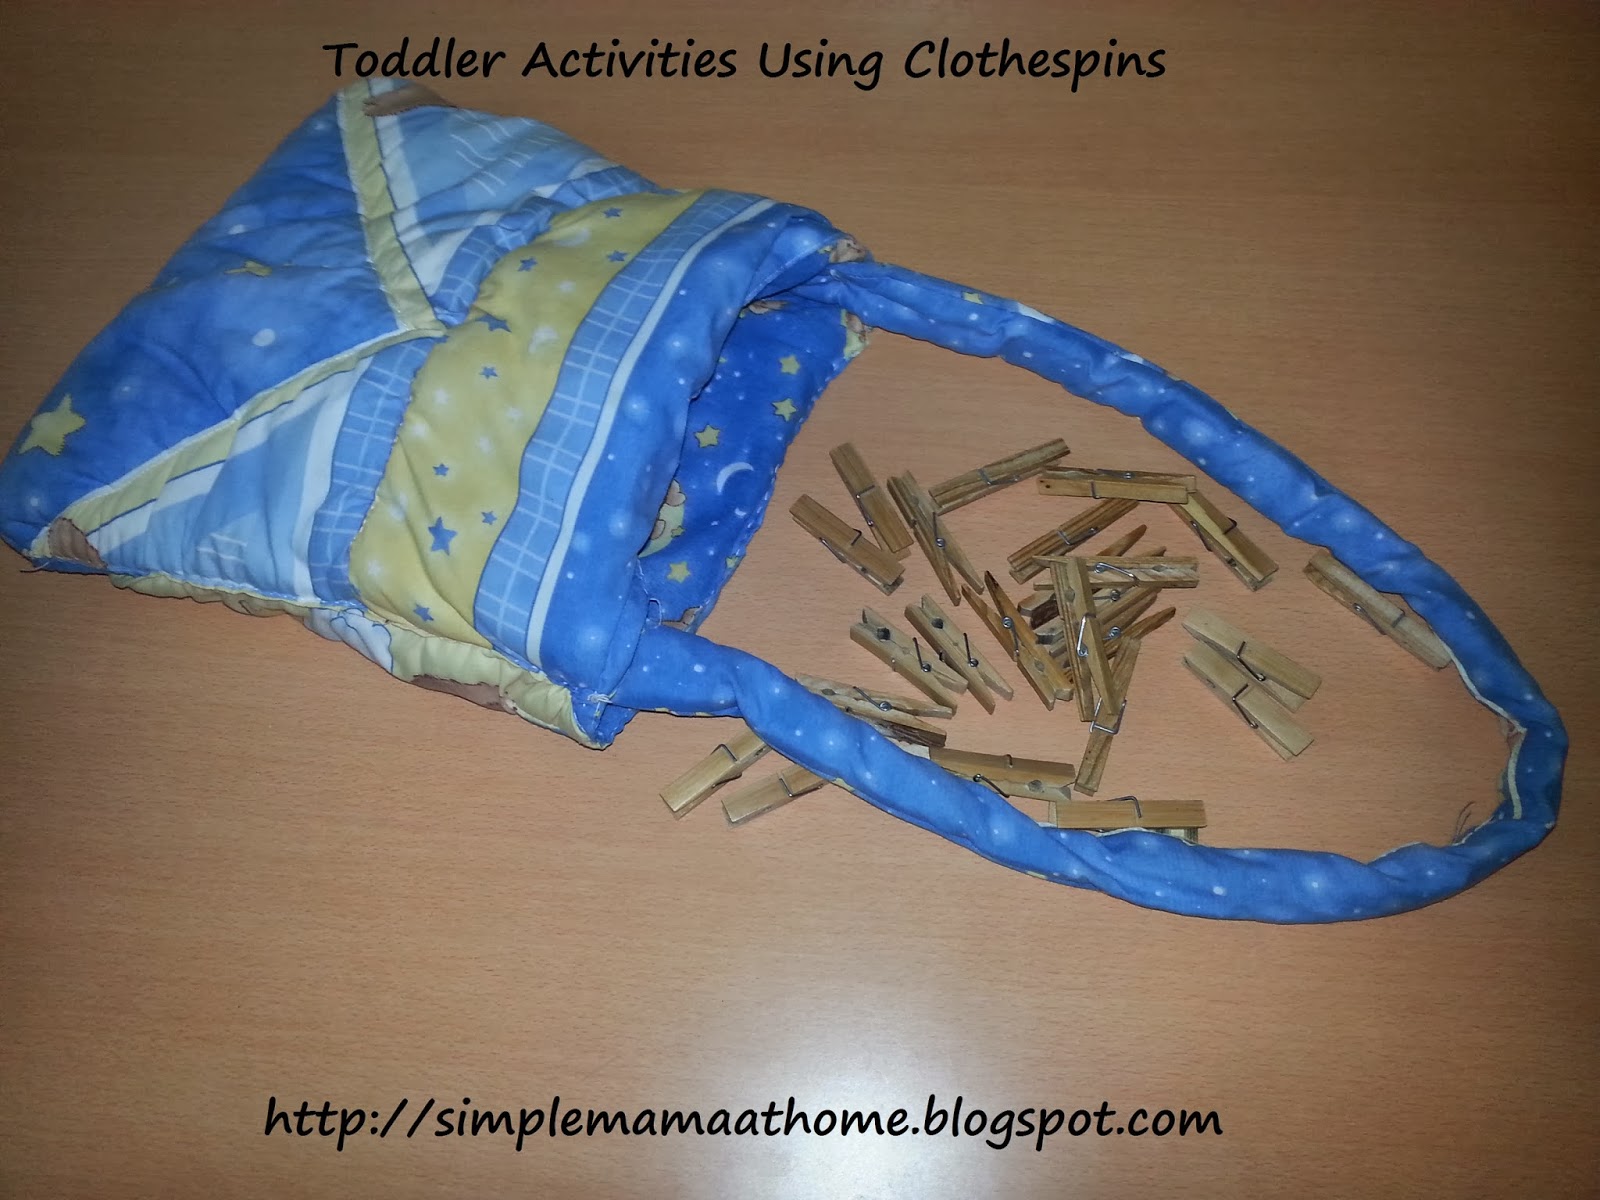 Toddler Activities Using Clothespins